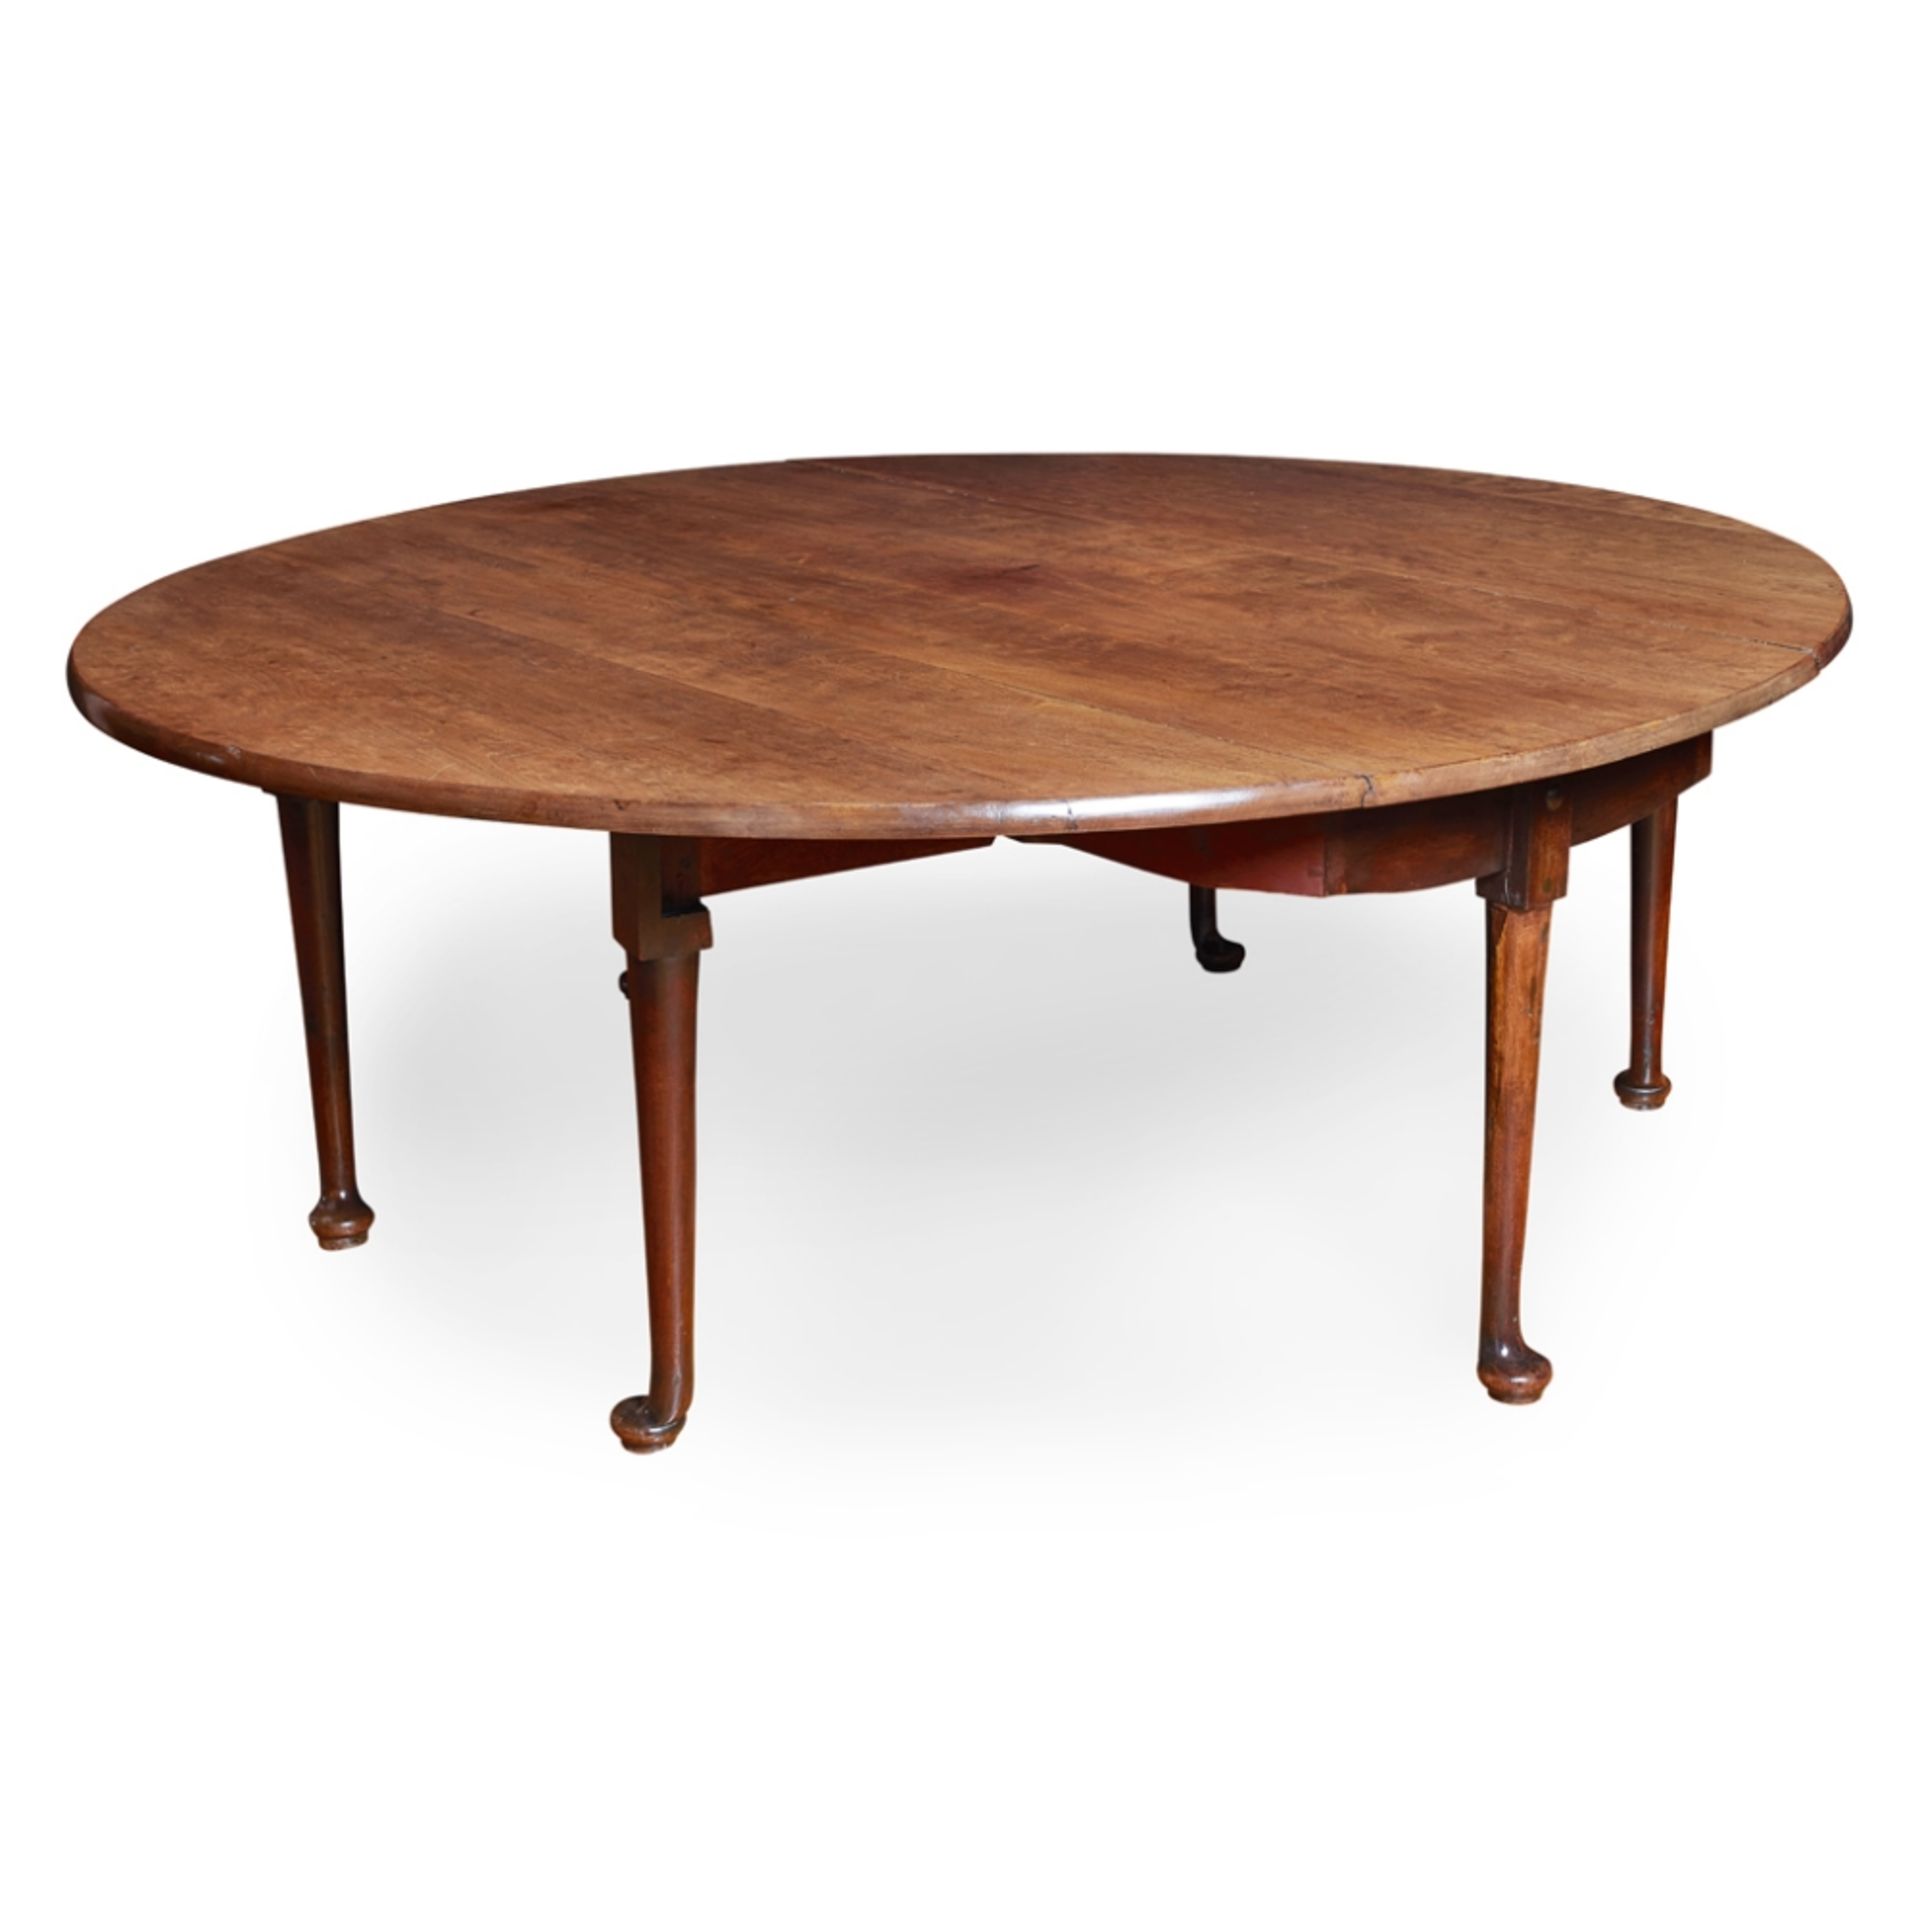 LARGE GEORGE II MAHOGANY CIRCULAR DROP-LEAF DINING TABLE MID-18TH CENTURY the oval top, raised on - Image 2 of 2